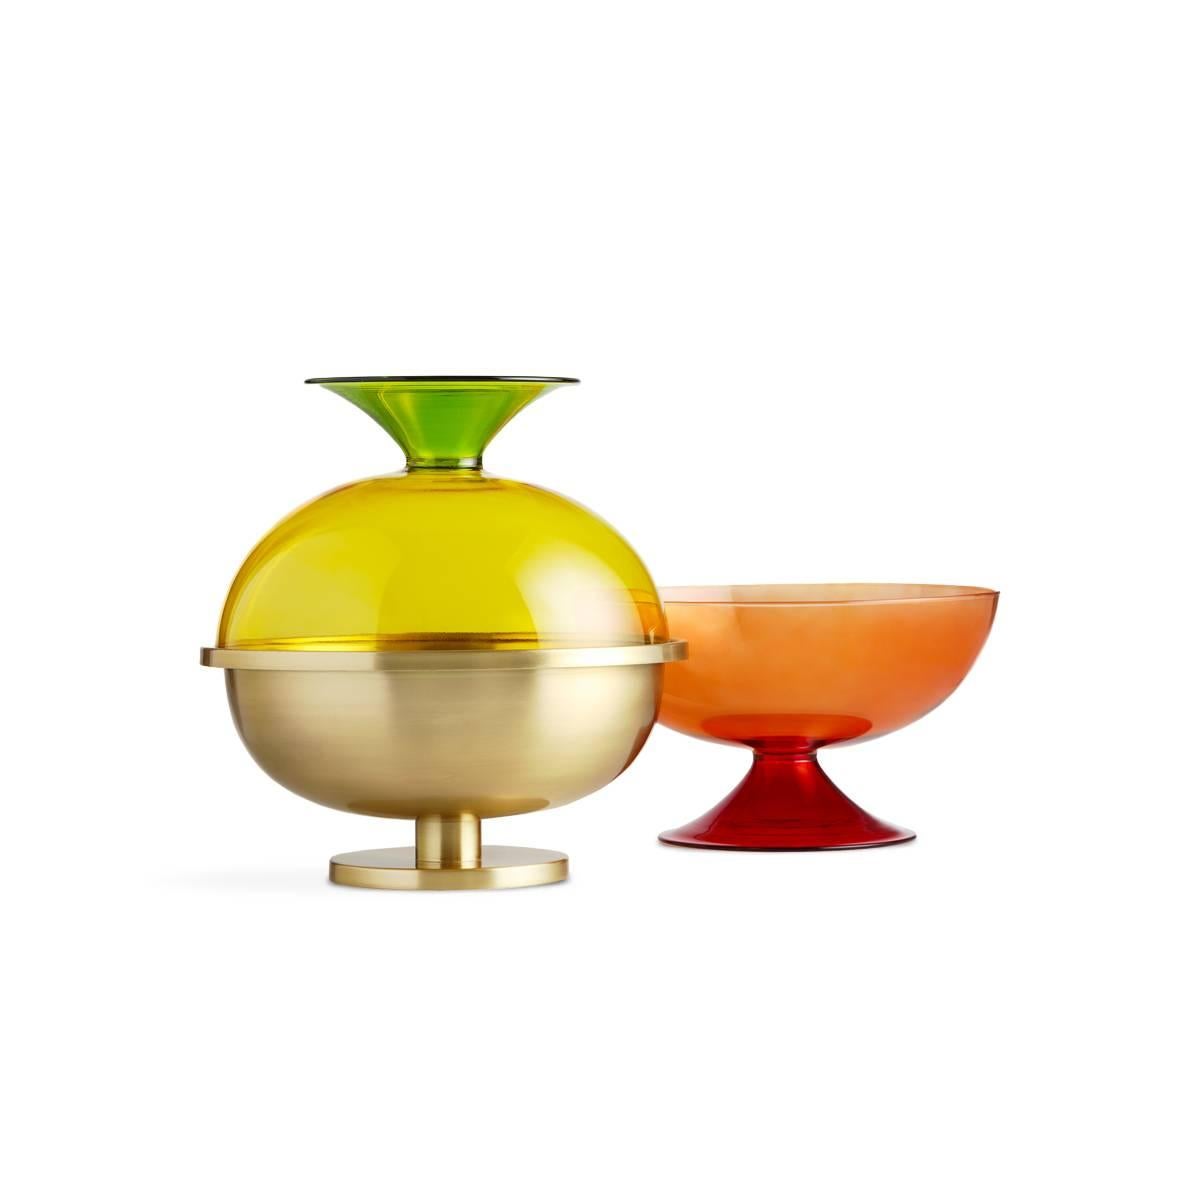 Cuppone is a large brass bowl that belongs to the Tablejoy collection, a family of tableware designed by Aldo Cibic, characterized by an upbeat, vividly colored and slightly radical spirit. All the objects of Tablejoy can be mixed together to